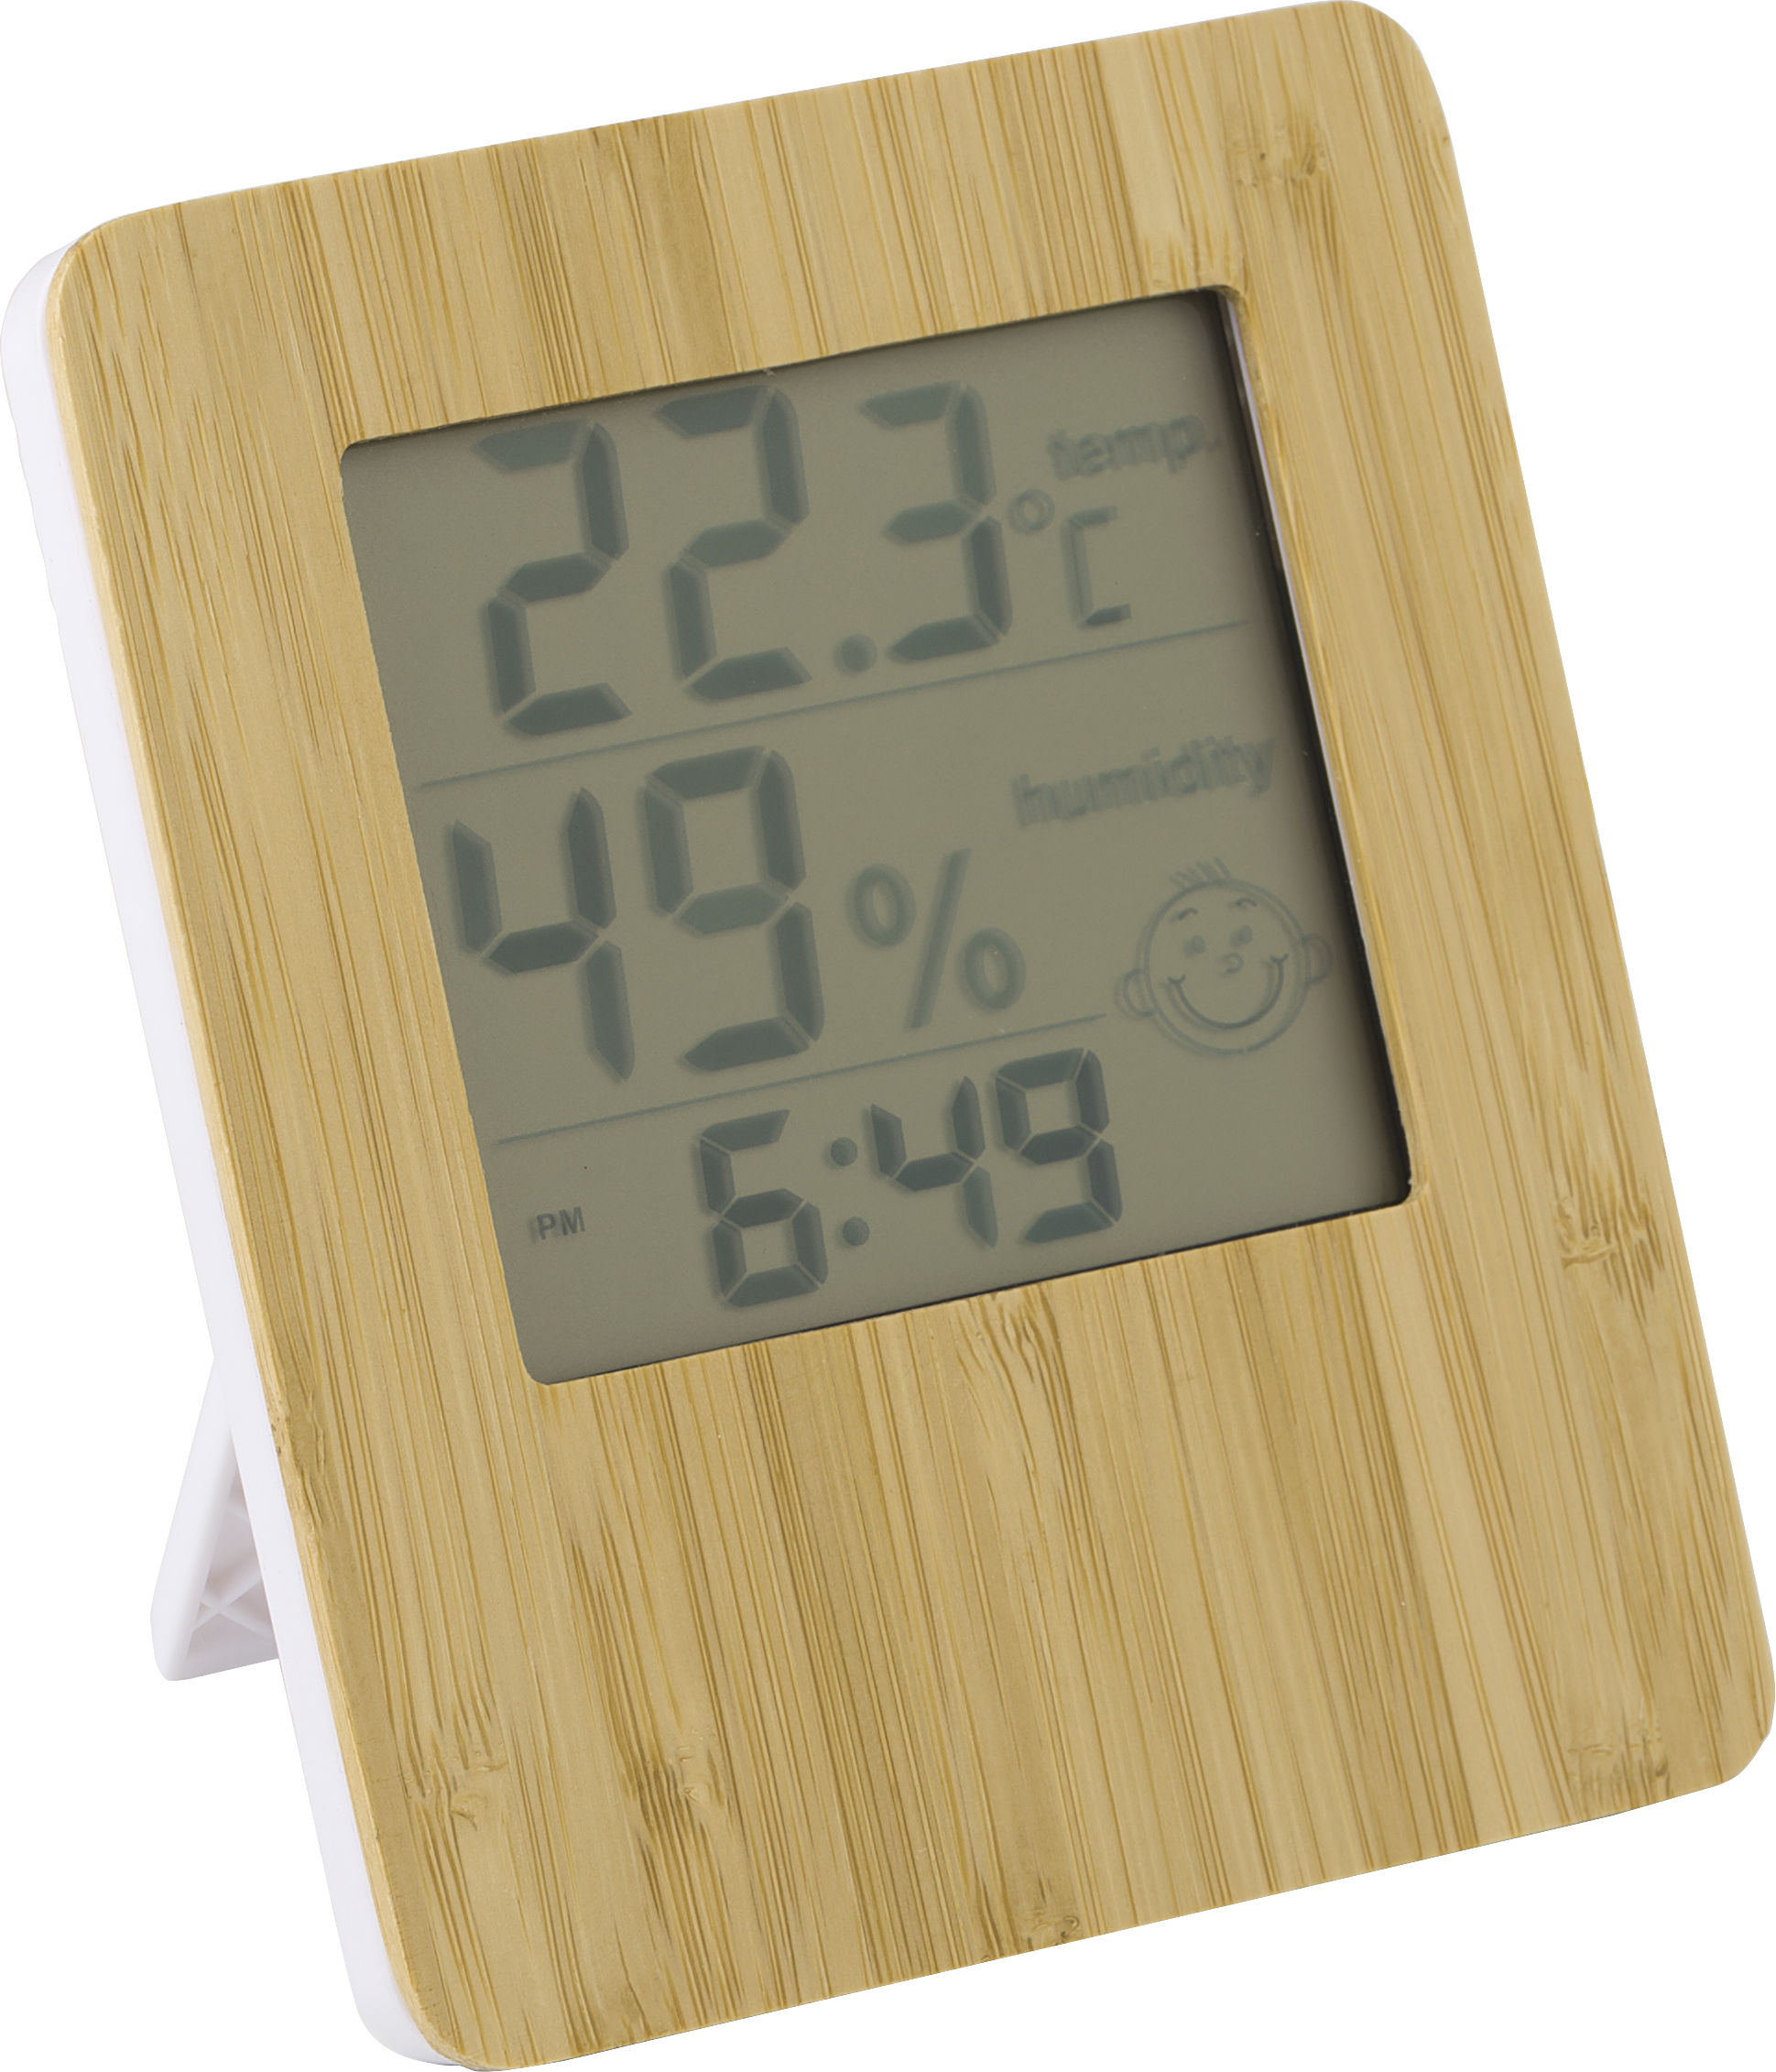 000000710951 823999999 3d135 lft pro01 2021 fal - Bamboo weather station